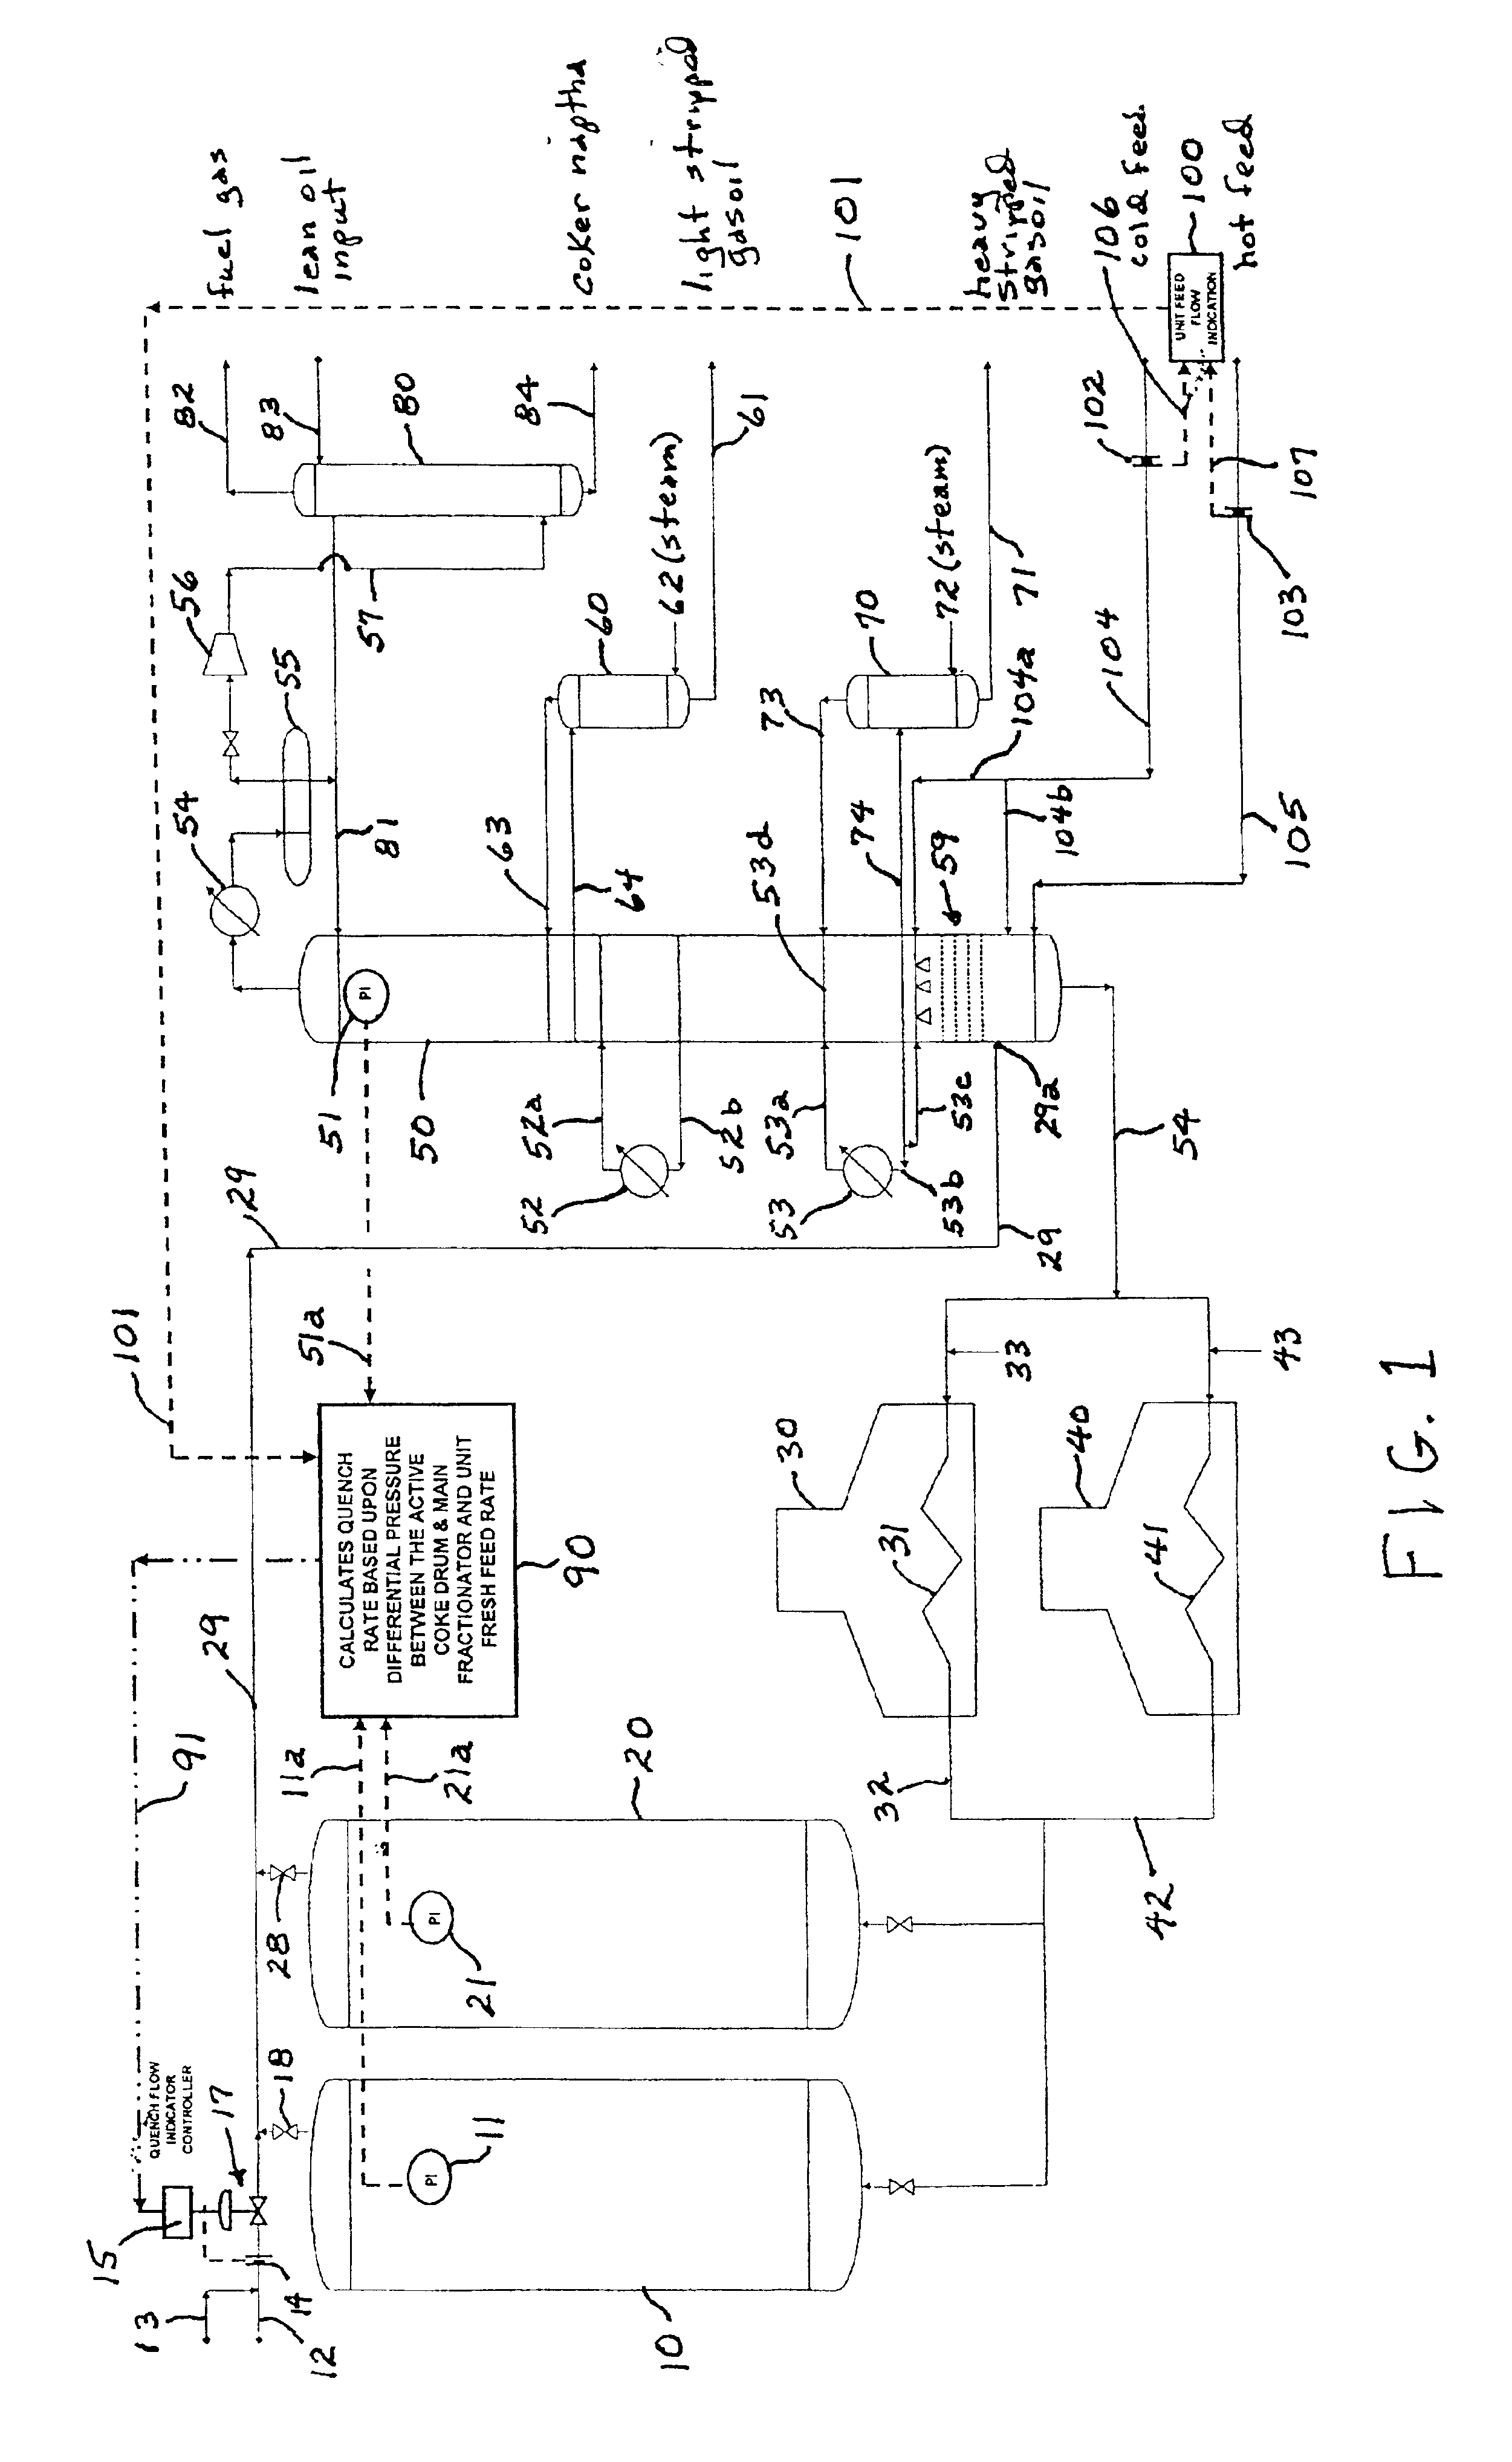 Method and apparatus for quenching the coke drum vapor line in a coker